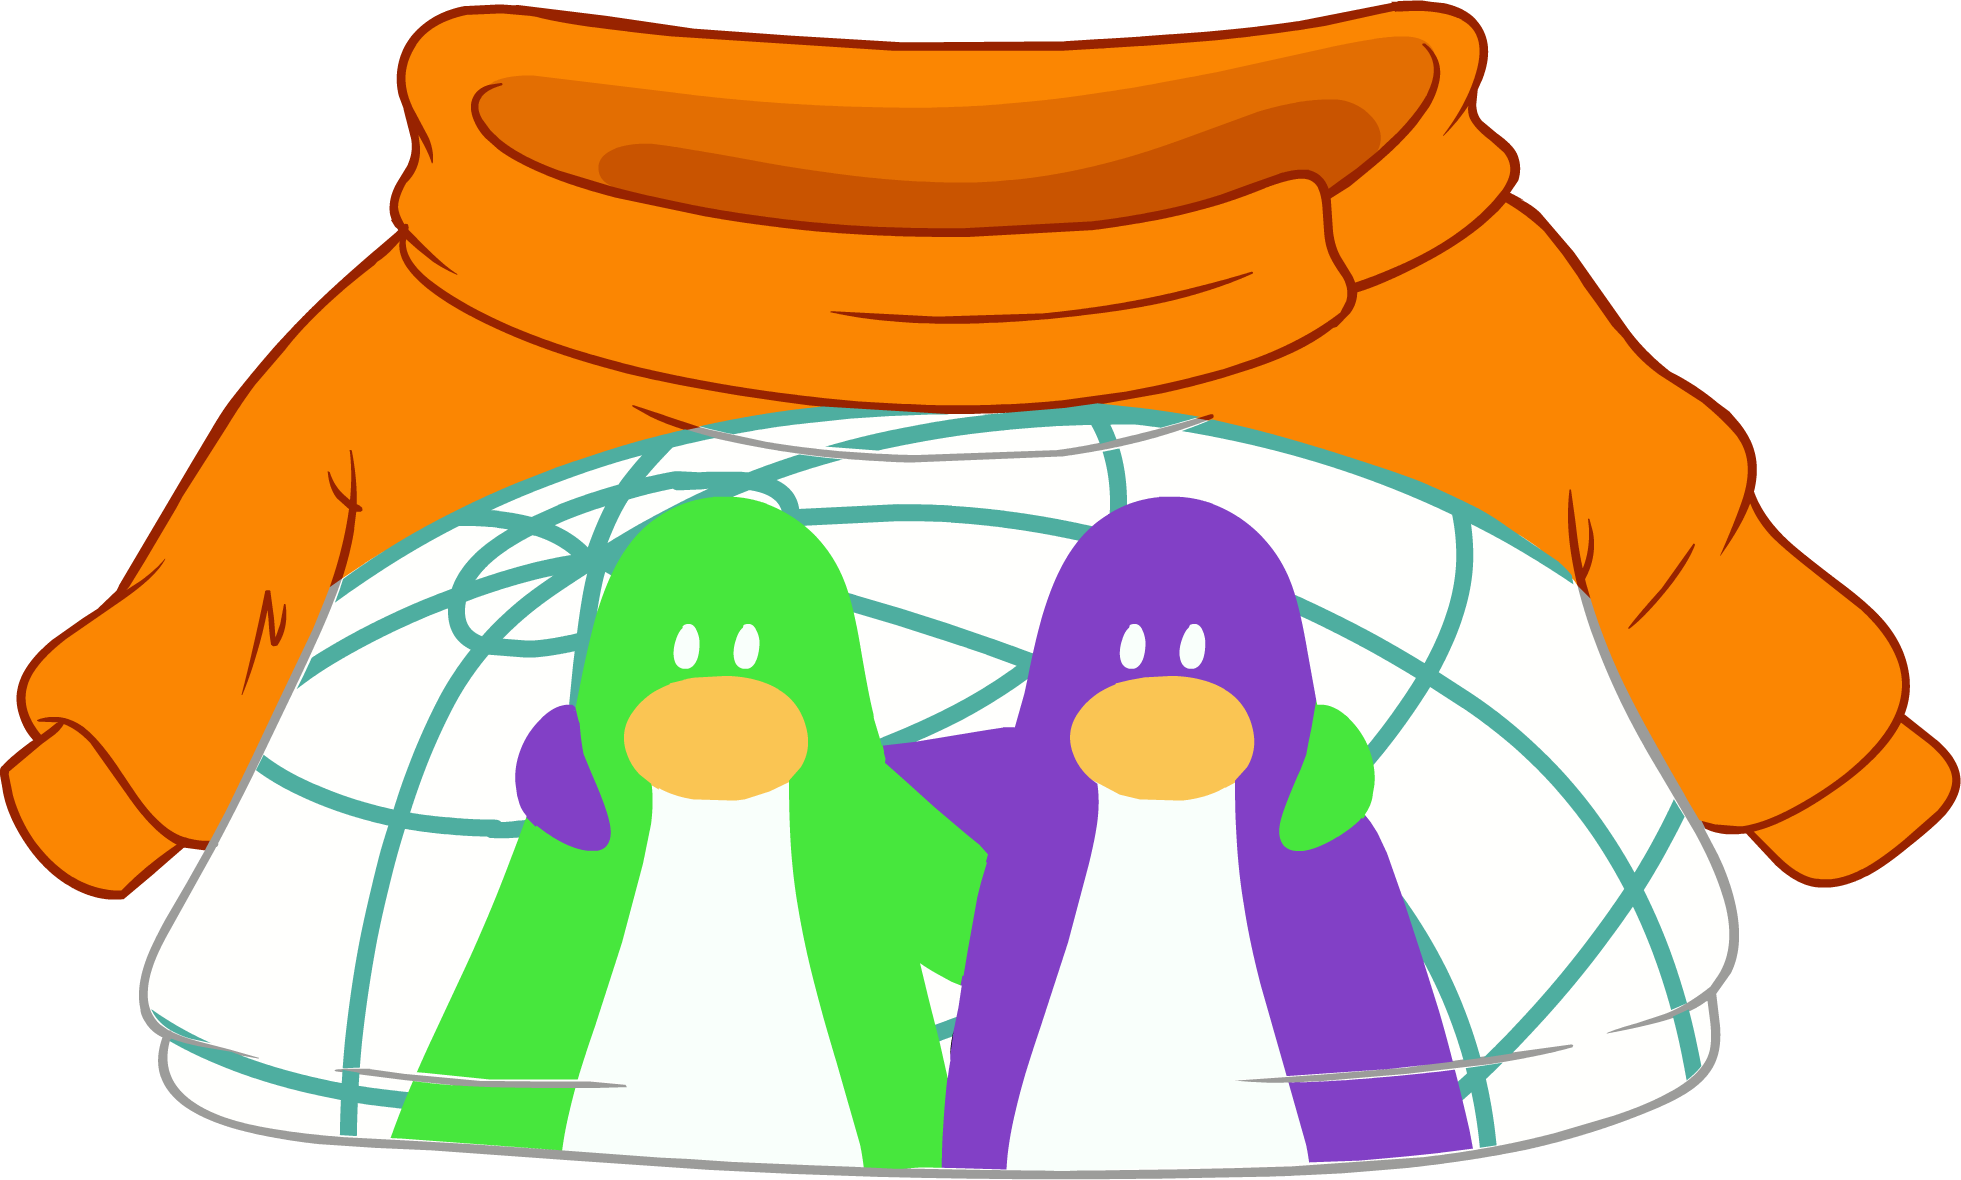 Online Safety Sweater - Club Penguin Internet Safety Sweater (1961x1180)